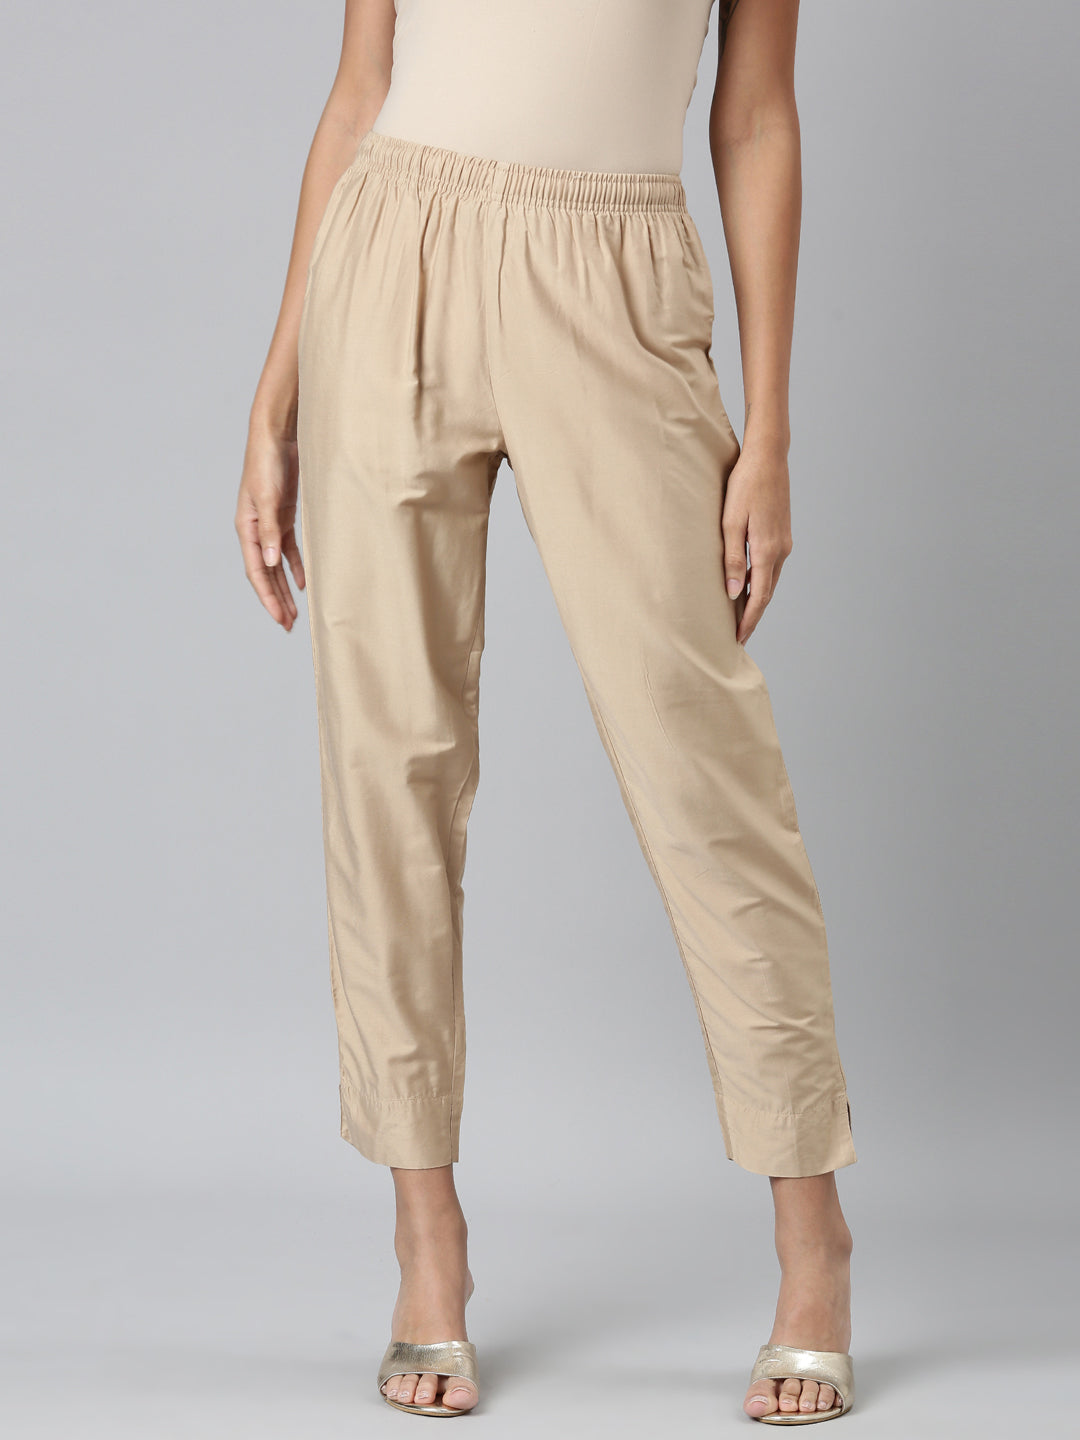 Buy GO COLORS Womens Tapered Fit Modal Metallic Pants Light GoldL at  Amazonin